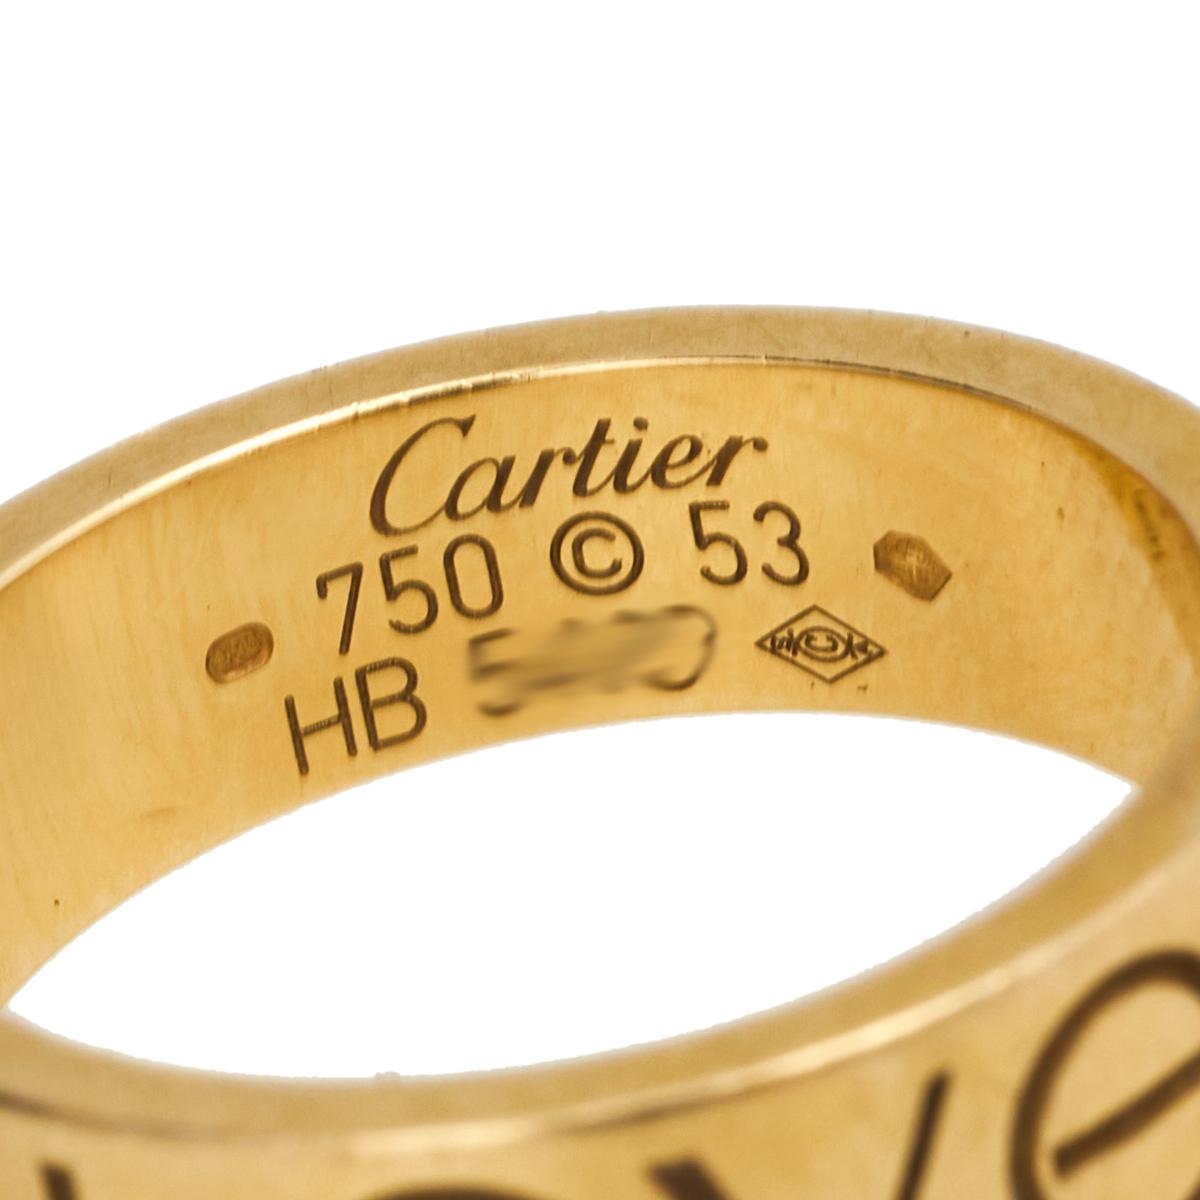 Cherished by people across the world, the iconic Cartier Love ring is a truly timeless creation. Designed in 18K yellow gold, this ring is added with the word LOVE and has the screw motif added to the O and E. This ring is a celebration of classic